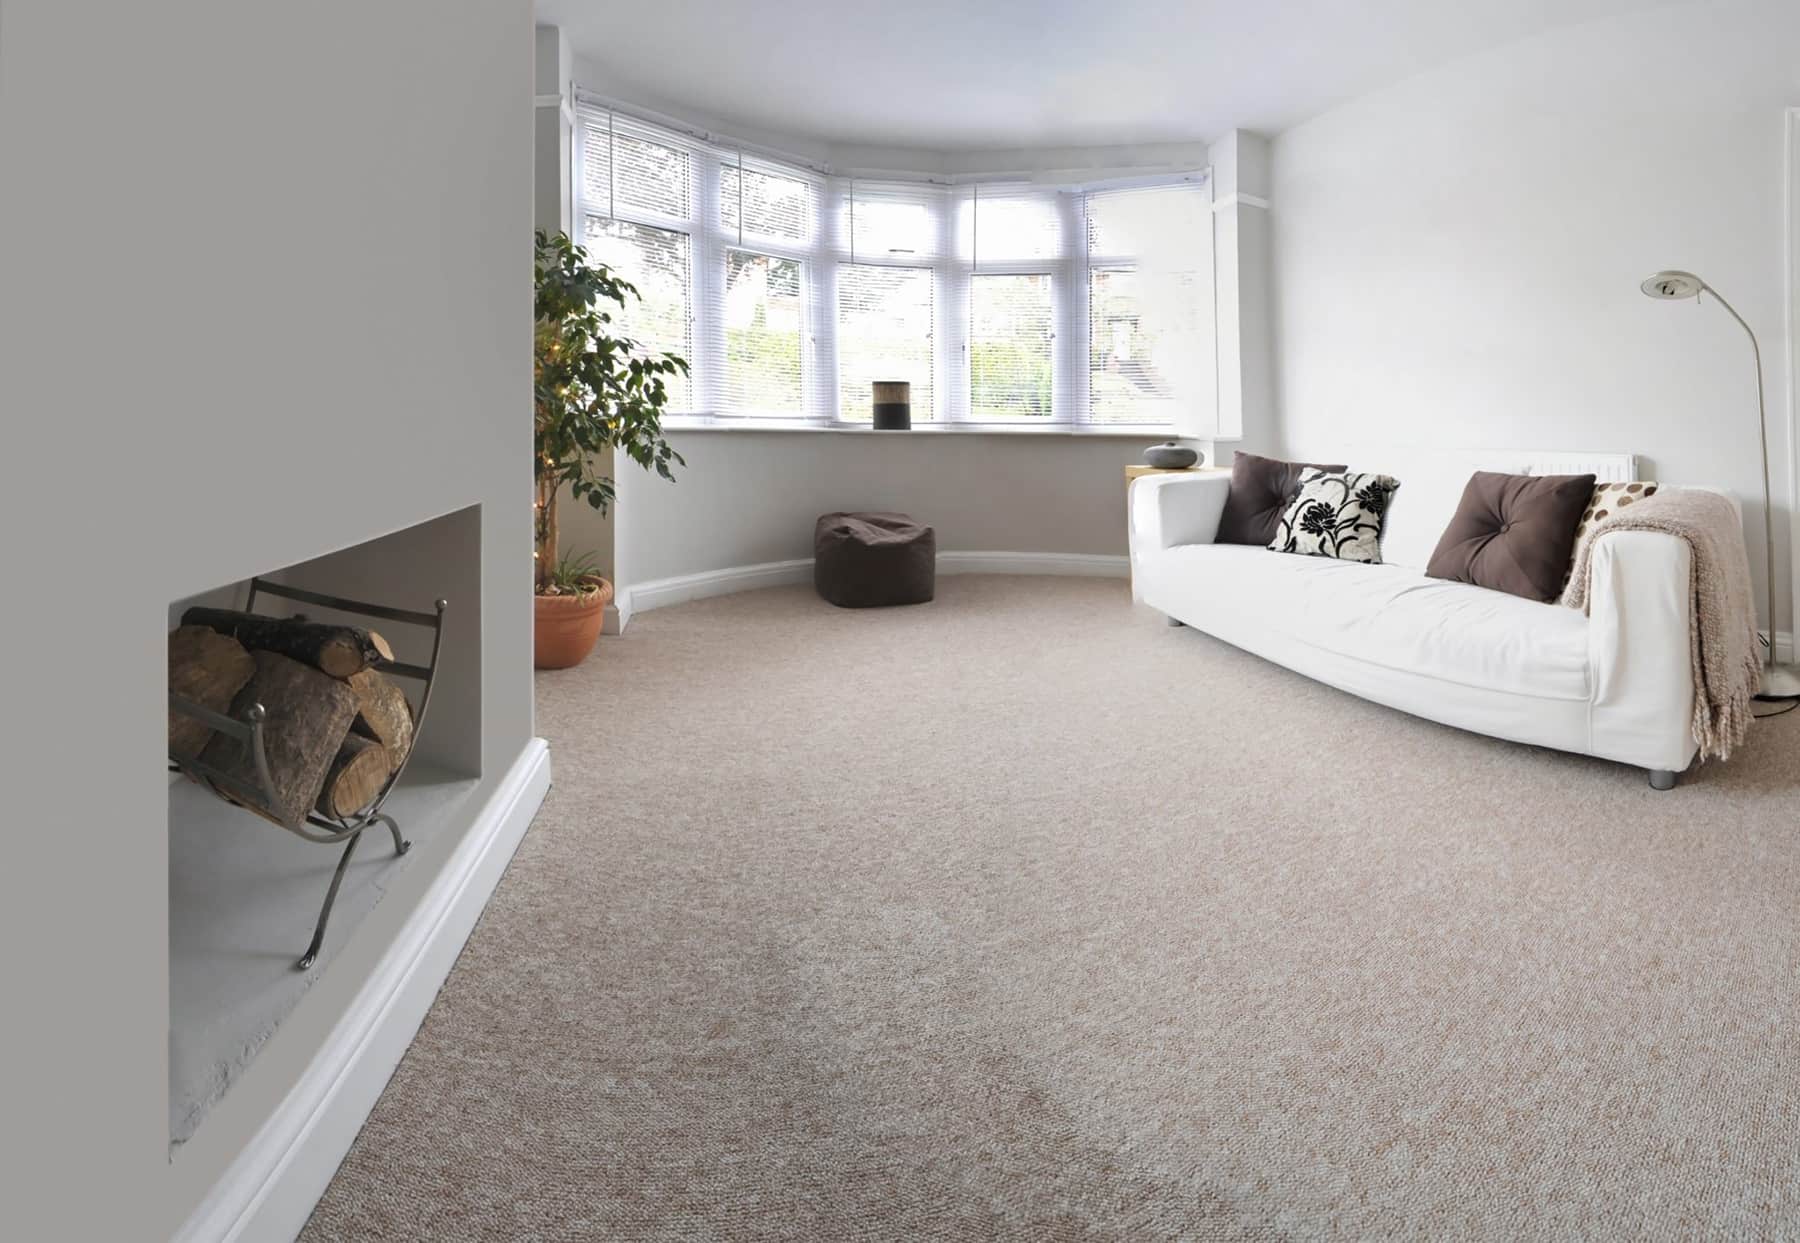 Abfresh Carpet Cleaning Services | North East